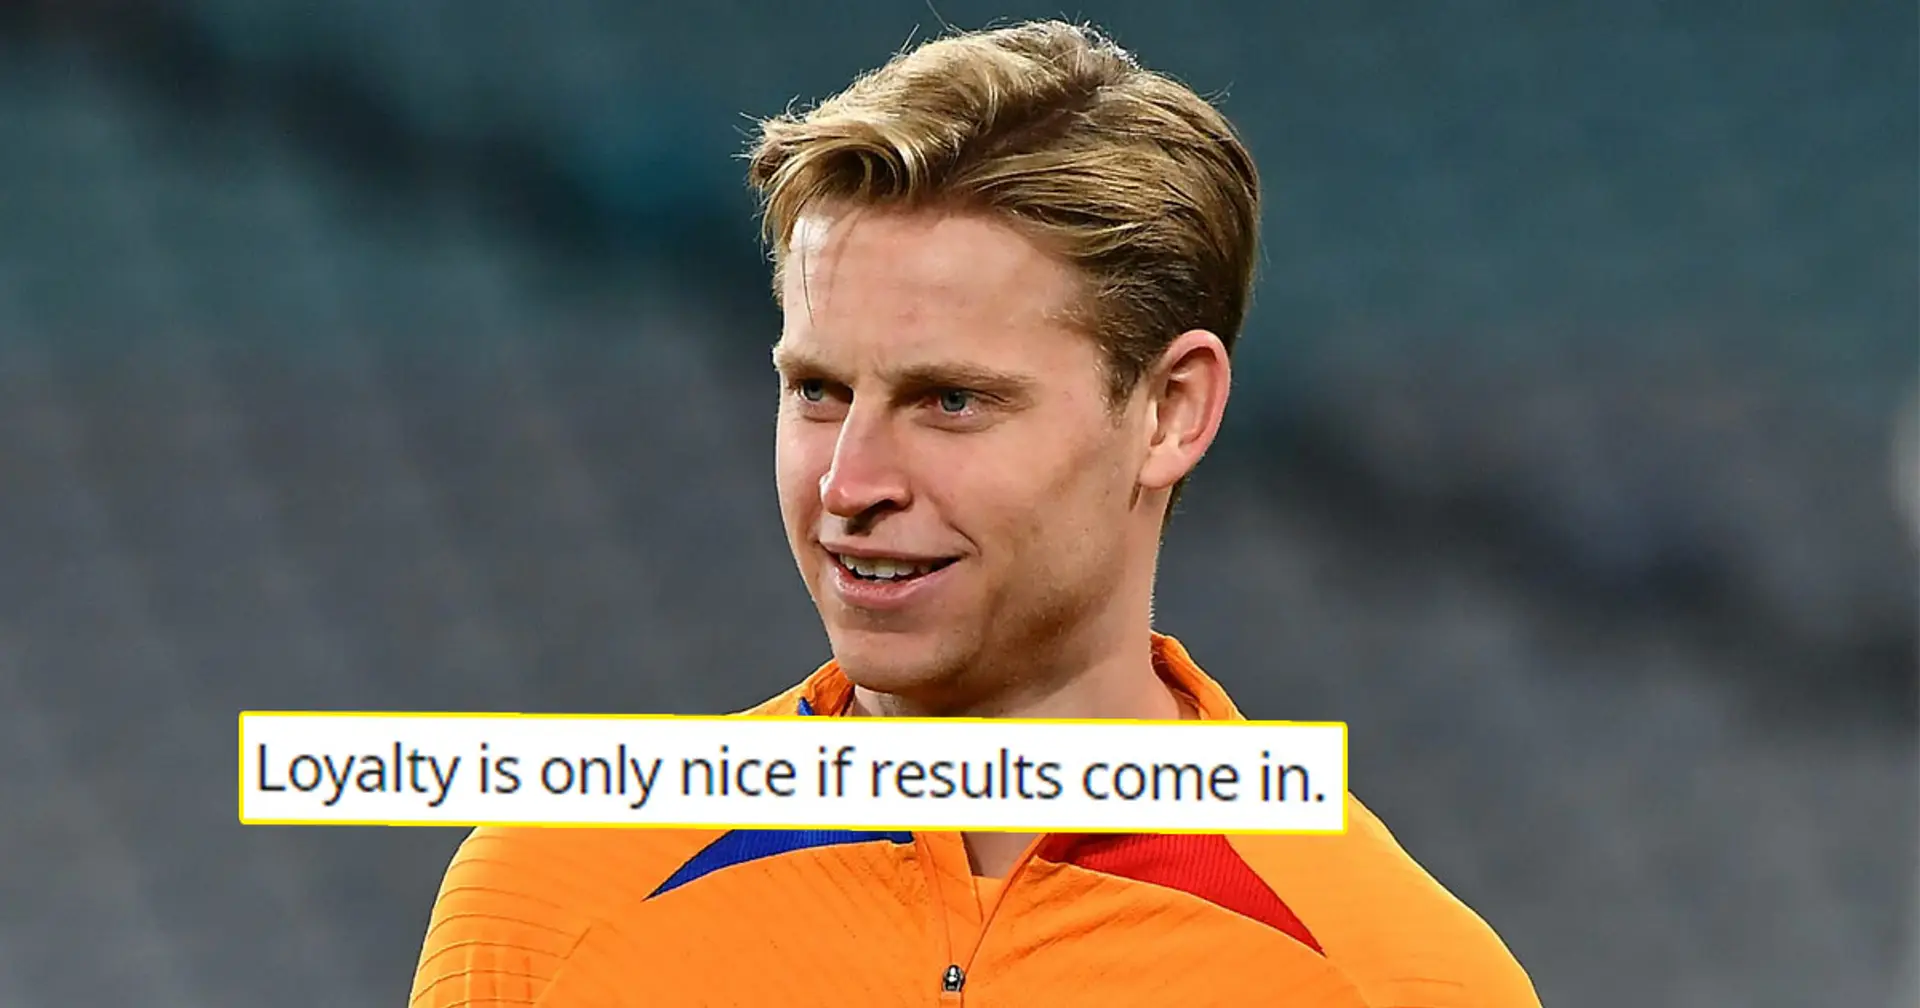 Fan argues De Jong's loyalty isn't enough to keep him, uses another player as example